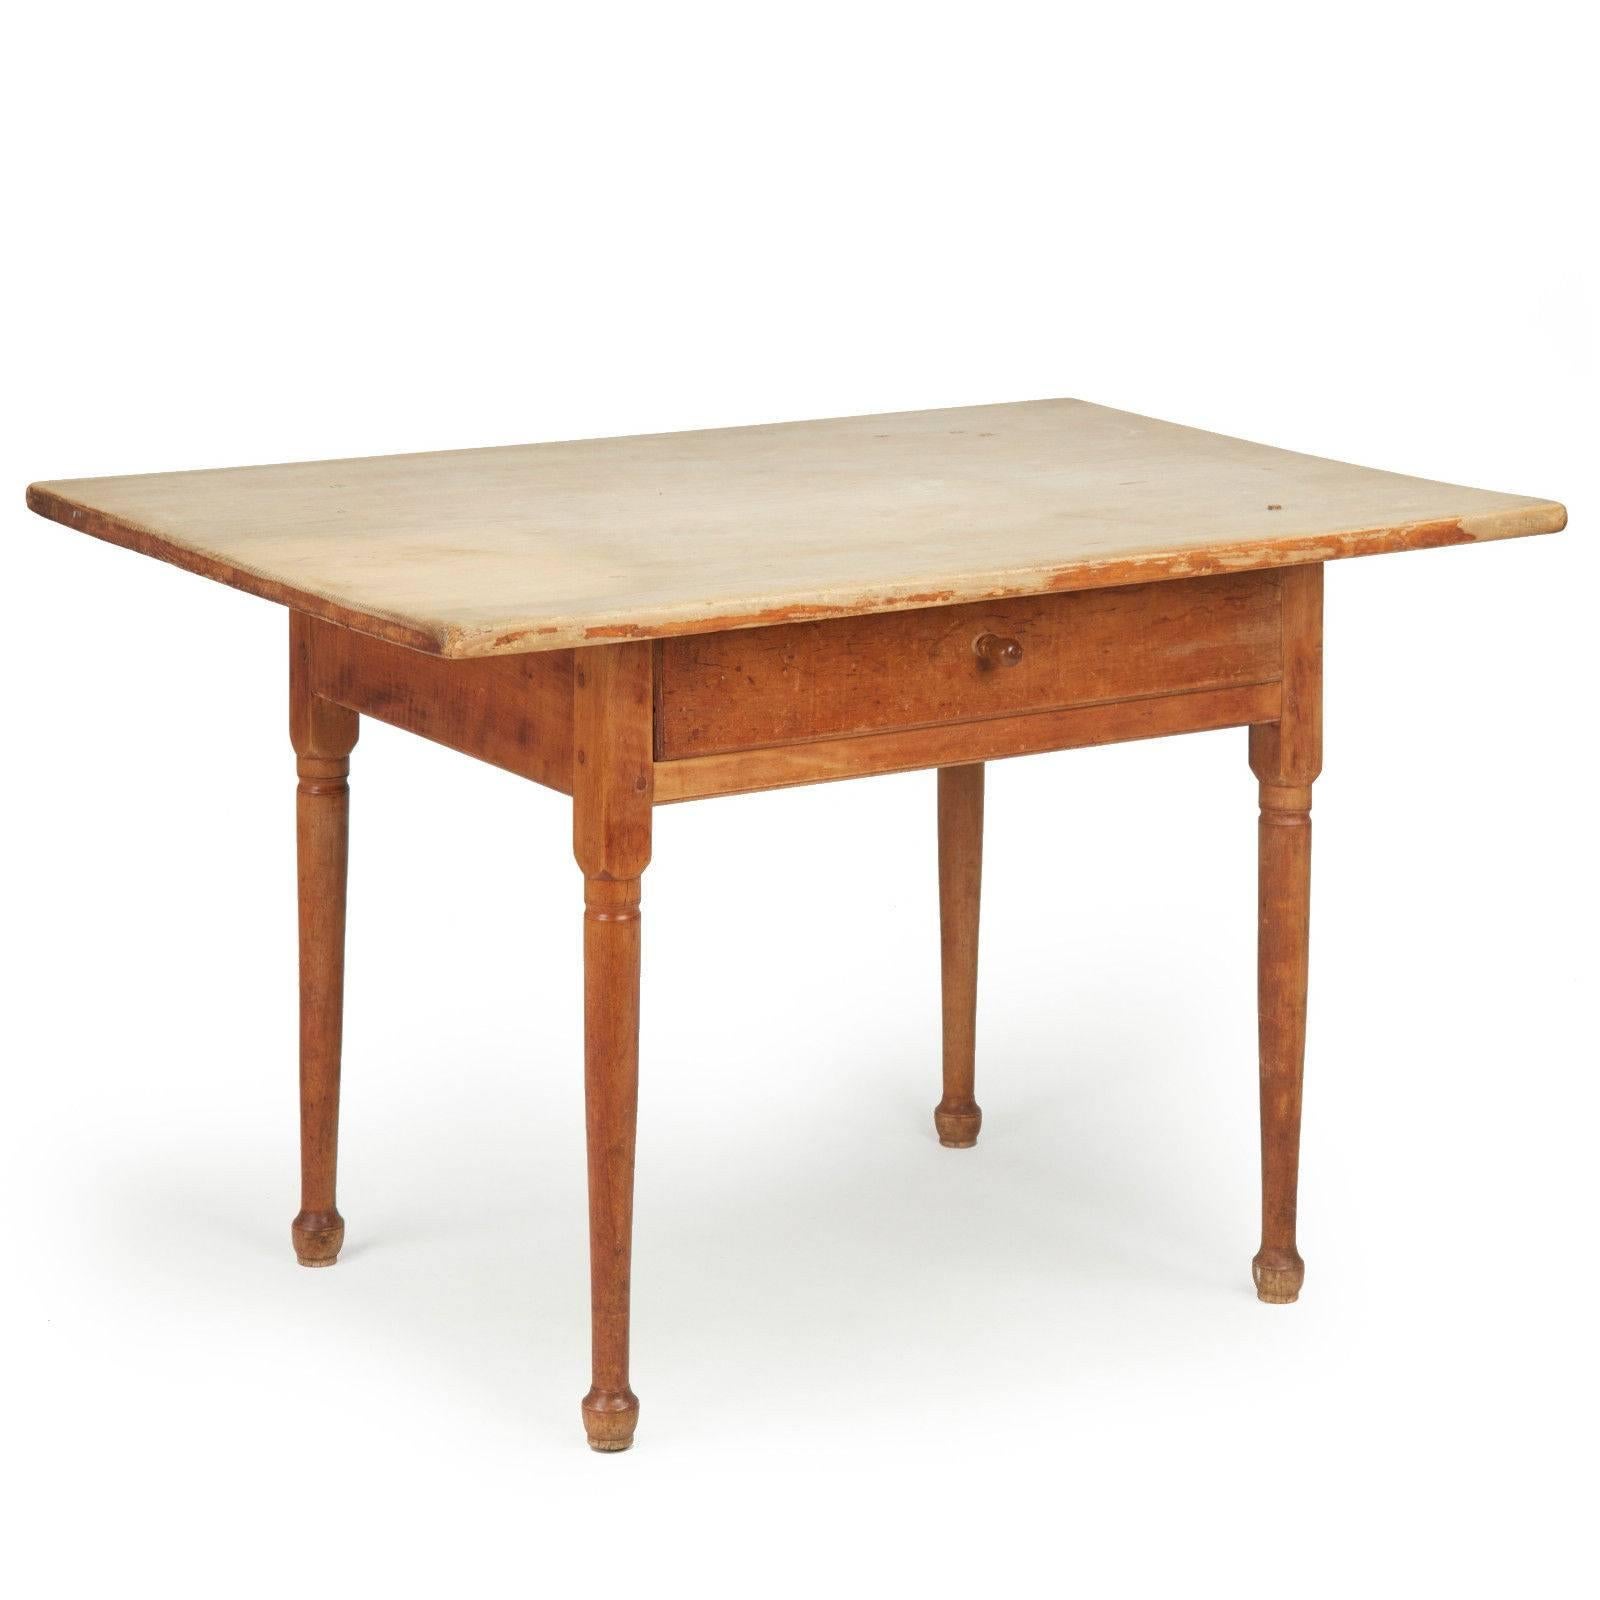 A most attractive primitive table, the table is austere and free of embellishment, a piece intended for function and use in a rural home. The top is a gorgeous and incredibly broad single solid plank of white pine, affixed at each corner with large